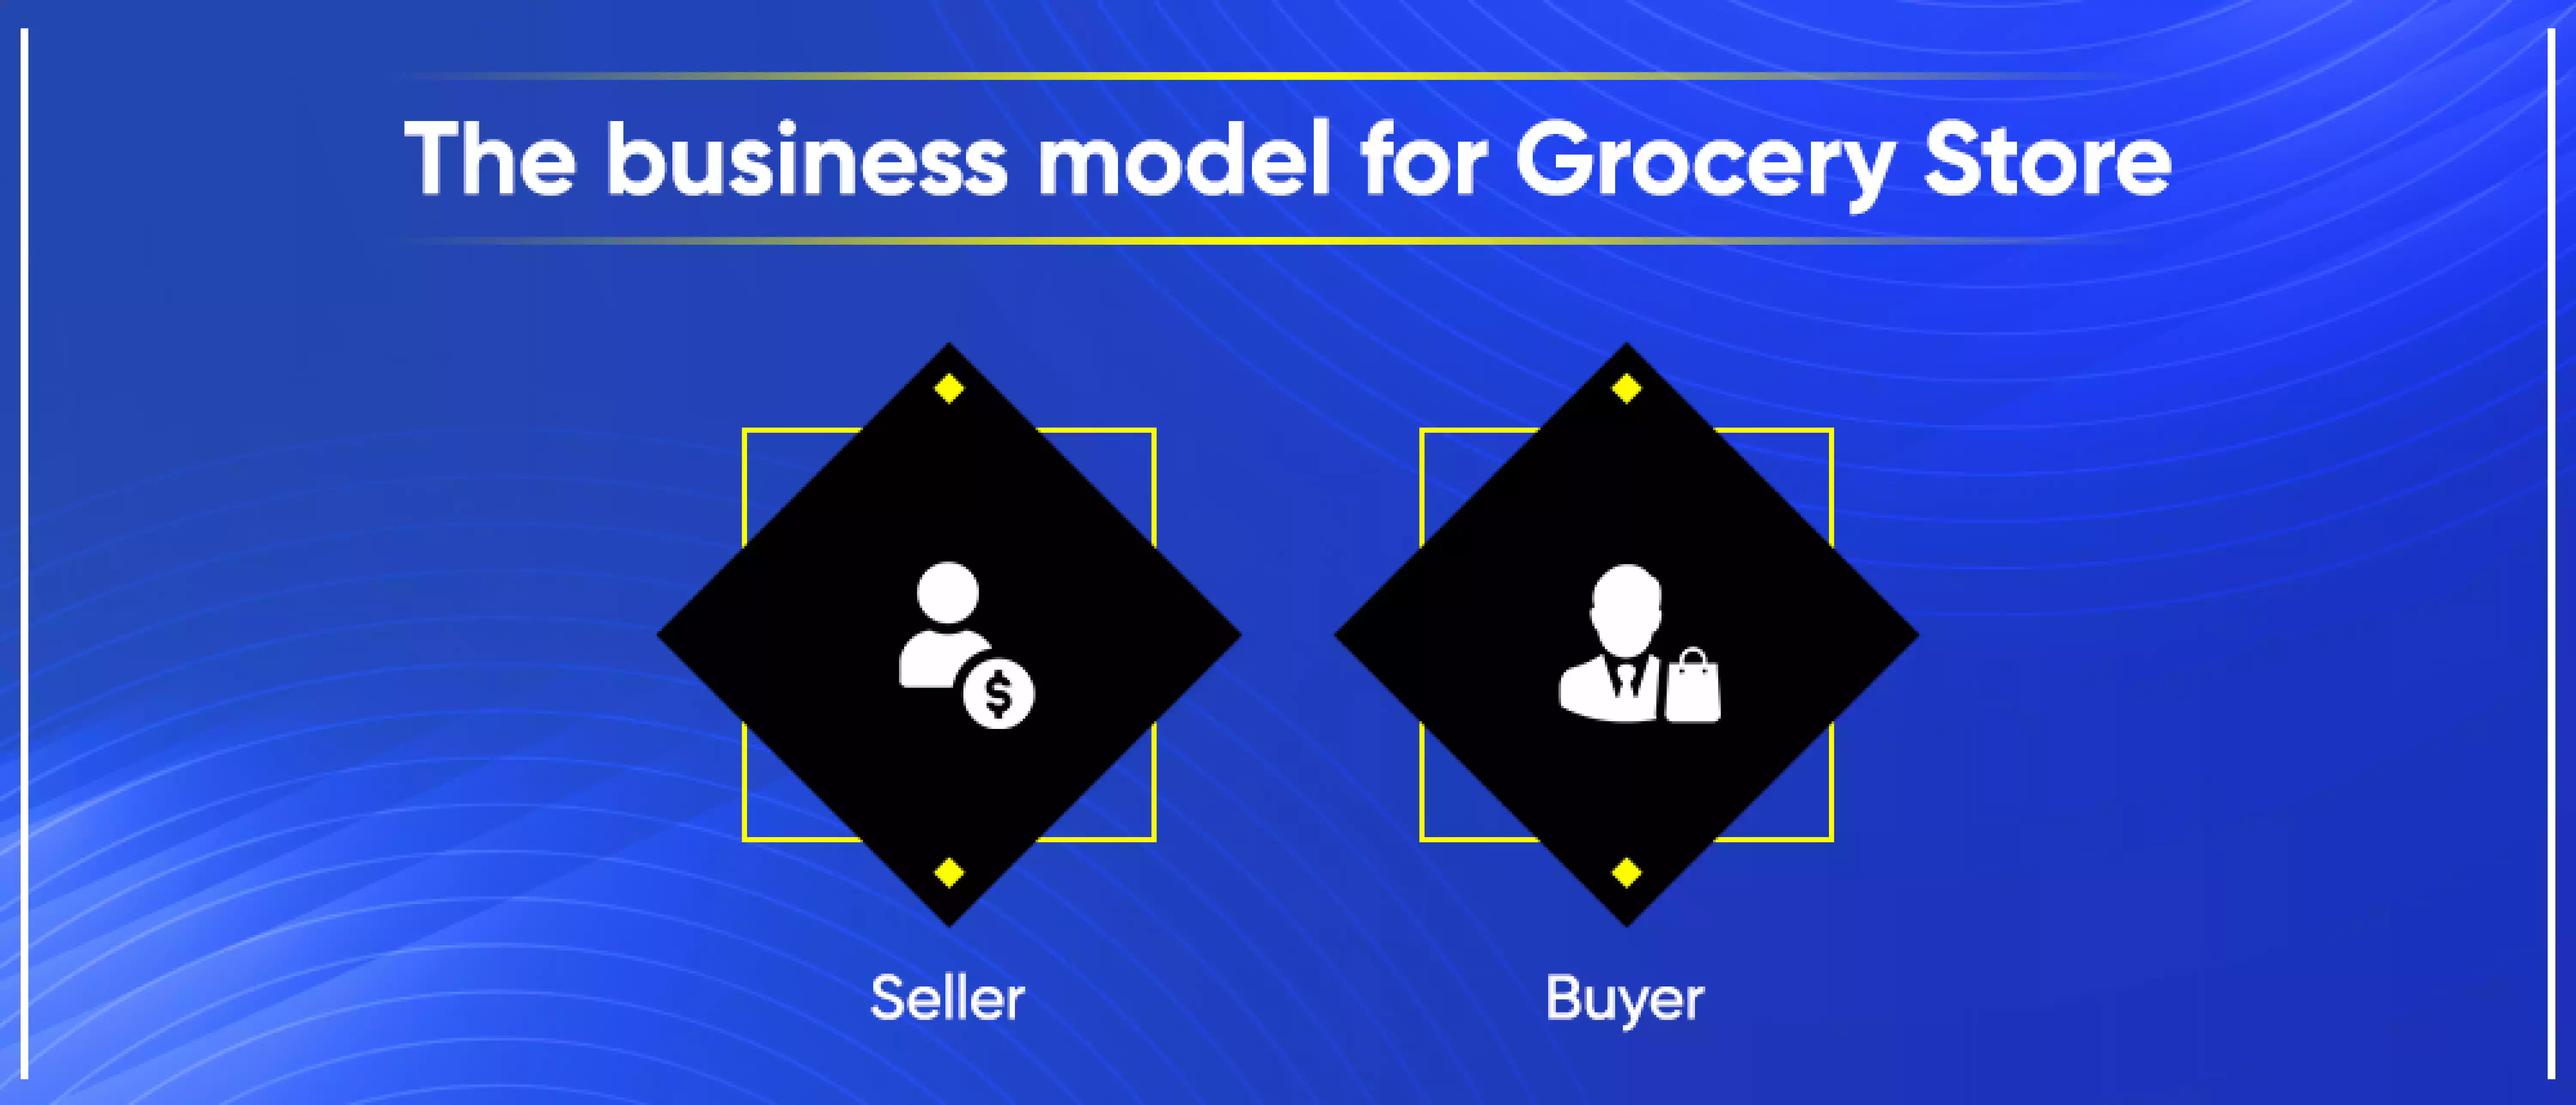 The business model for Grocery Store